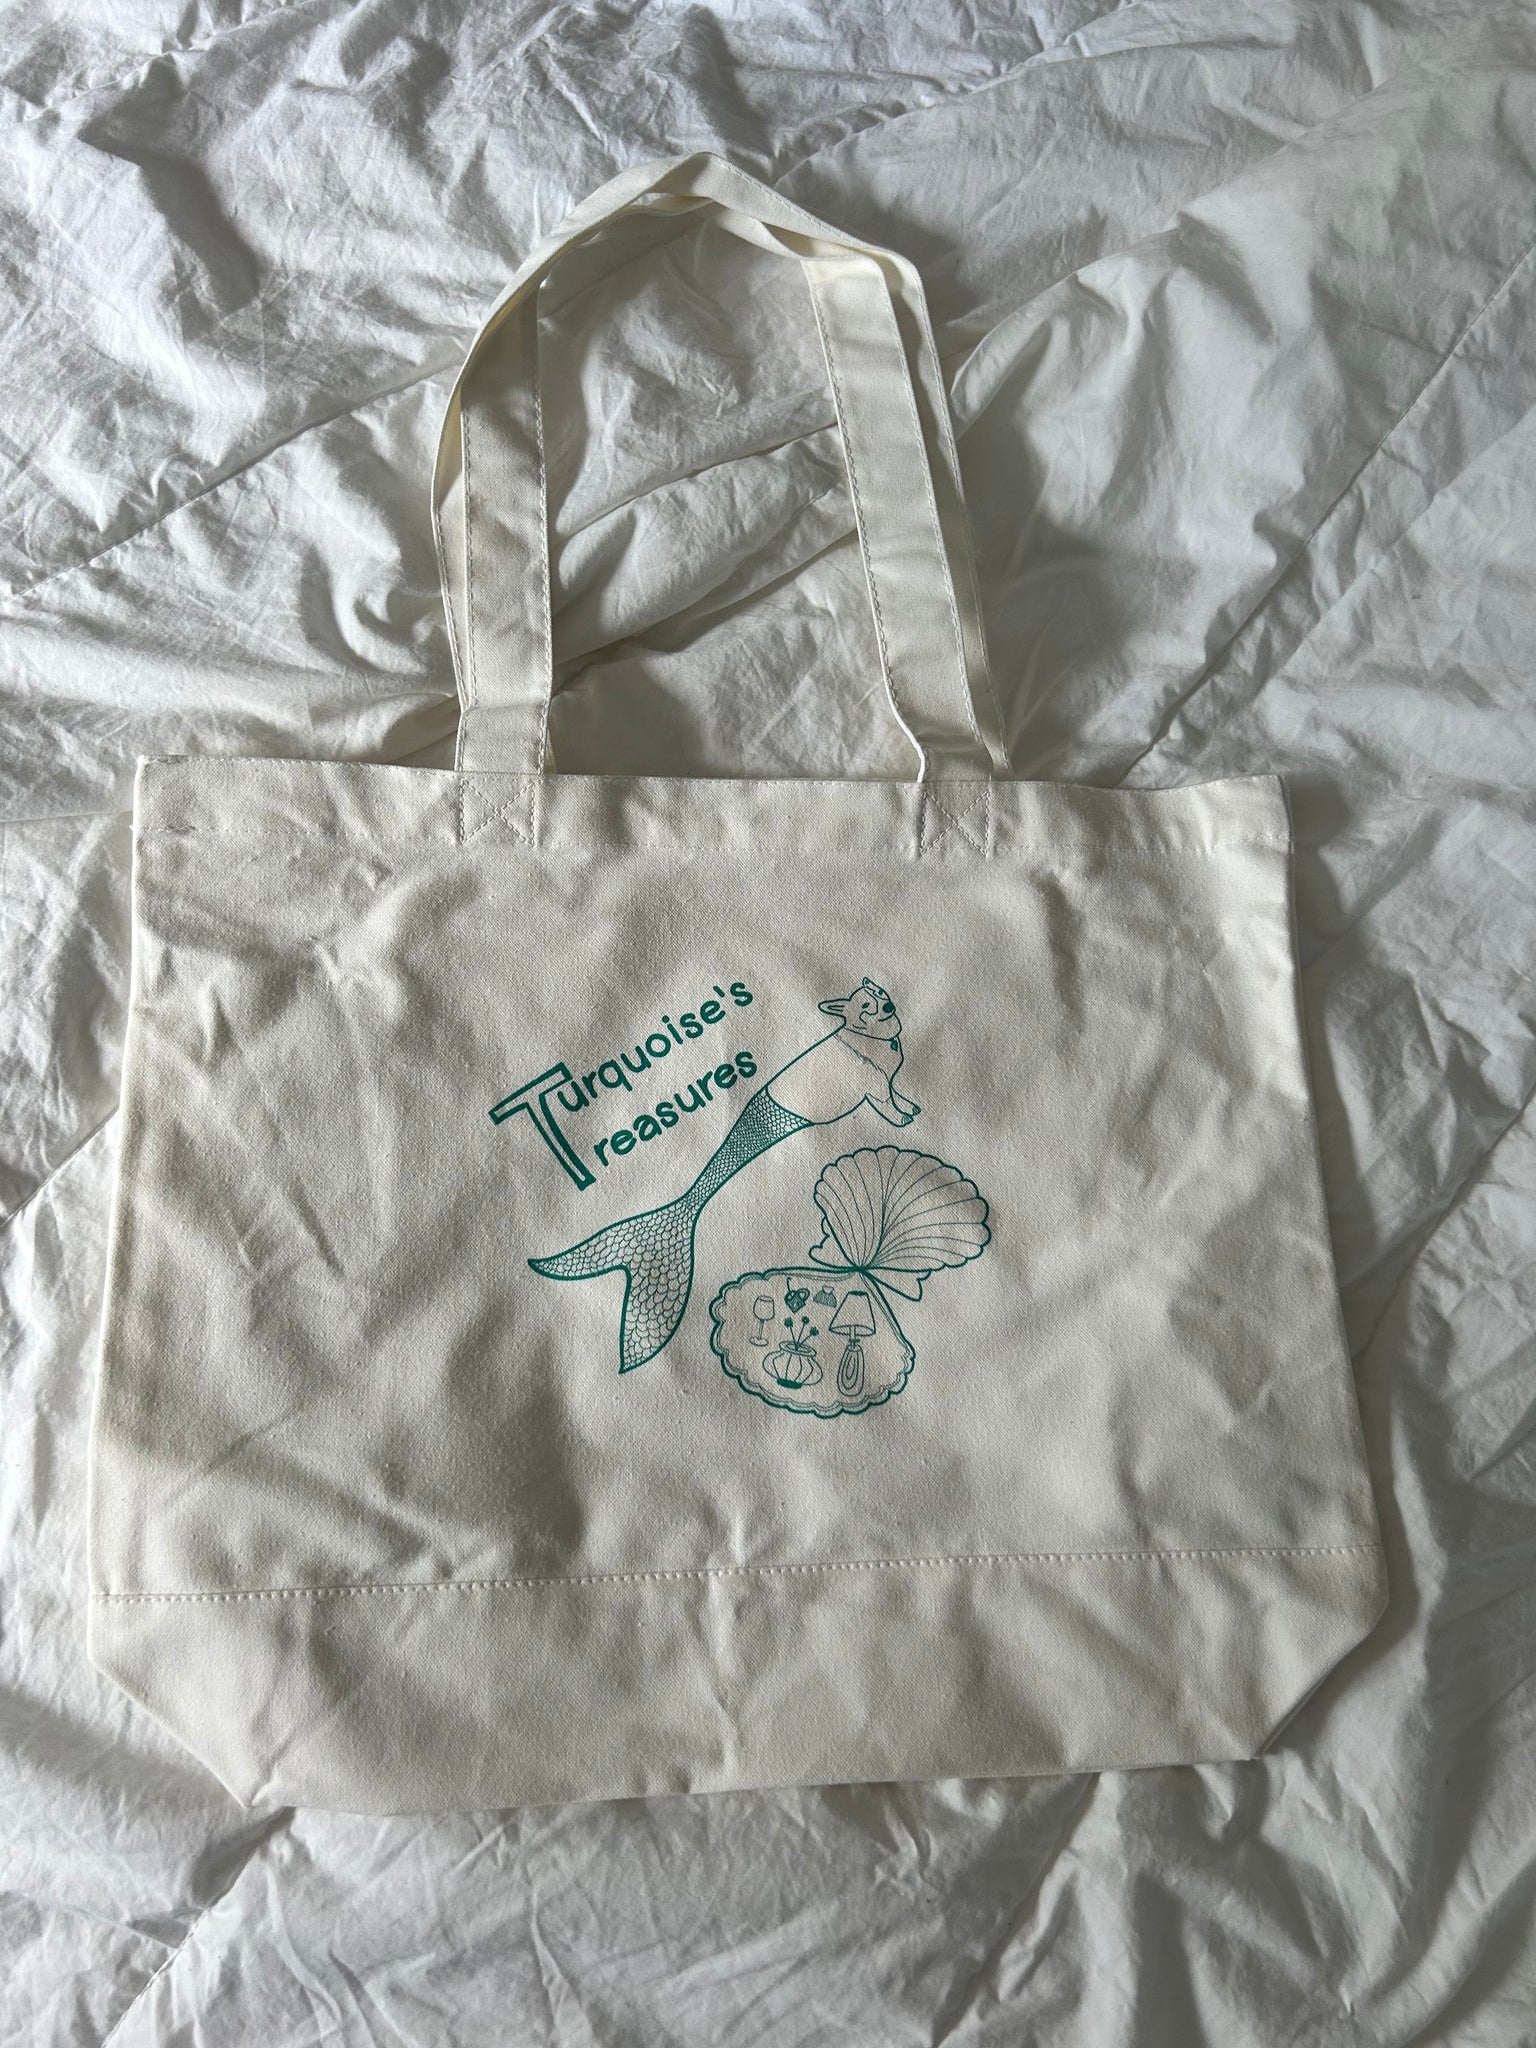 XL Turquoise’s Treasures tote bag